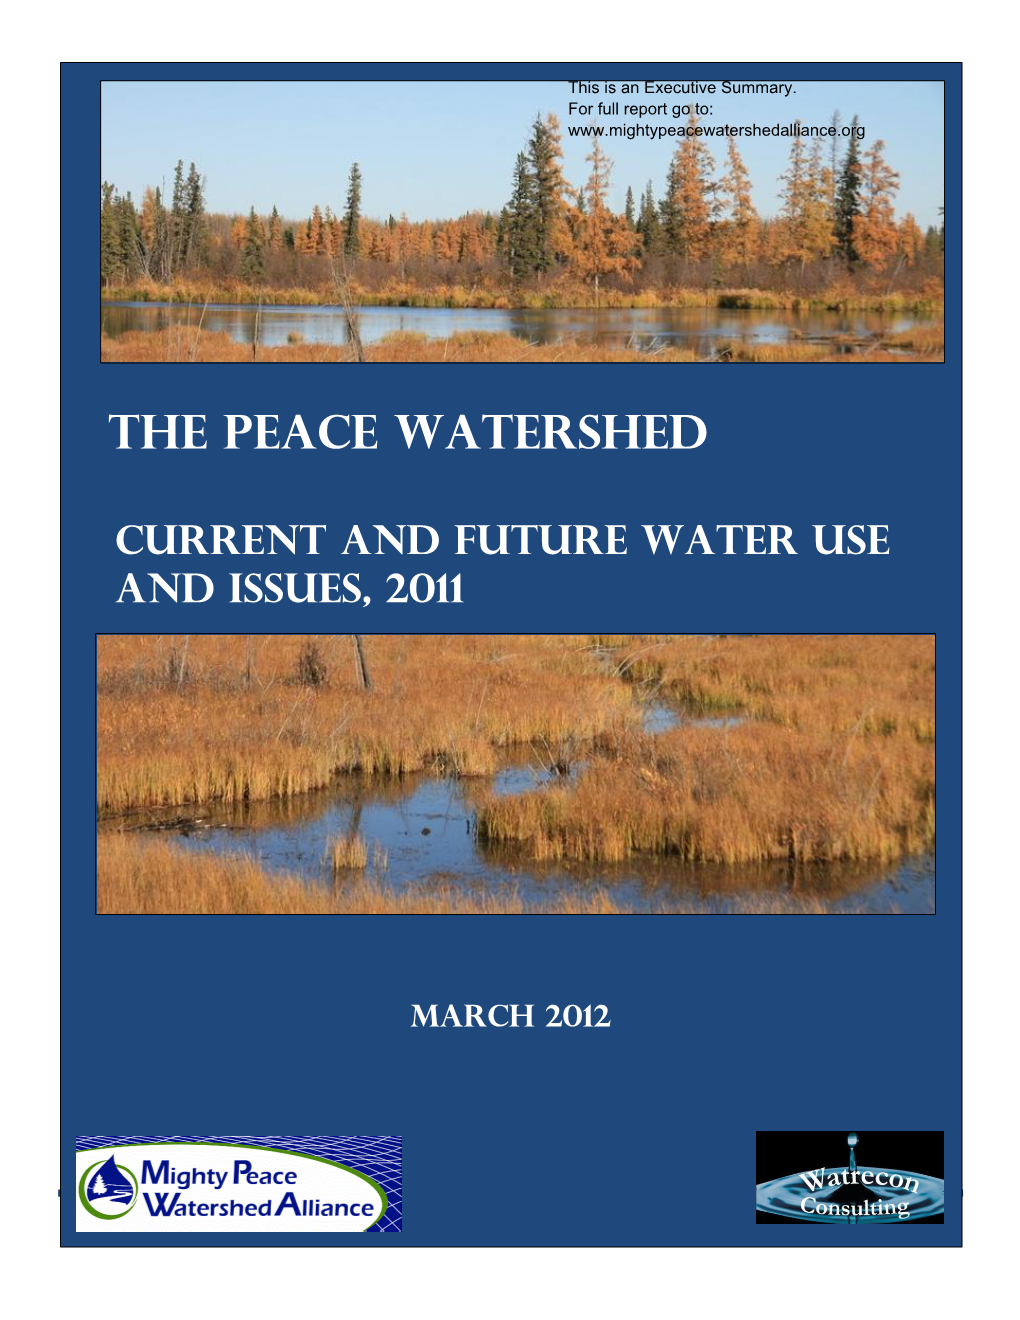 Current and Future Water Use and Issues, 2011